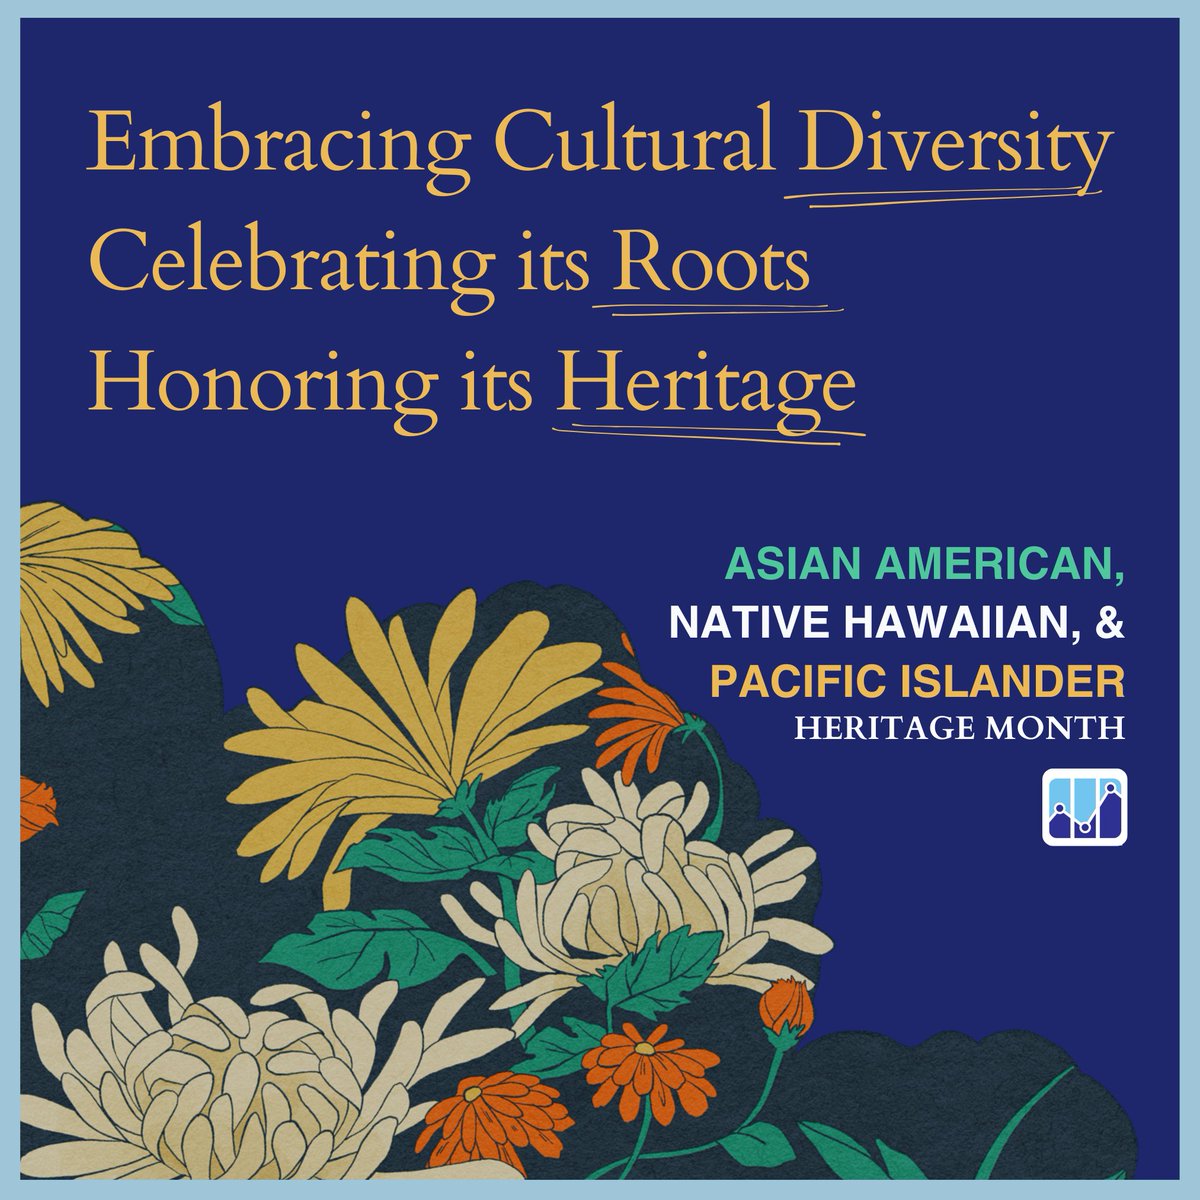 🌺It's #AANHPIHeritageMonth.🌸Let's celebrate the diverse cultures & contributions of these communities, eroding the notion of a monolith population & highlighting the richness of many ethnic & national groups. apnews.com/article/asian-… #AAPIMonth #Diversity #Heritage #Culture 🪷